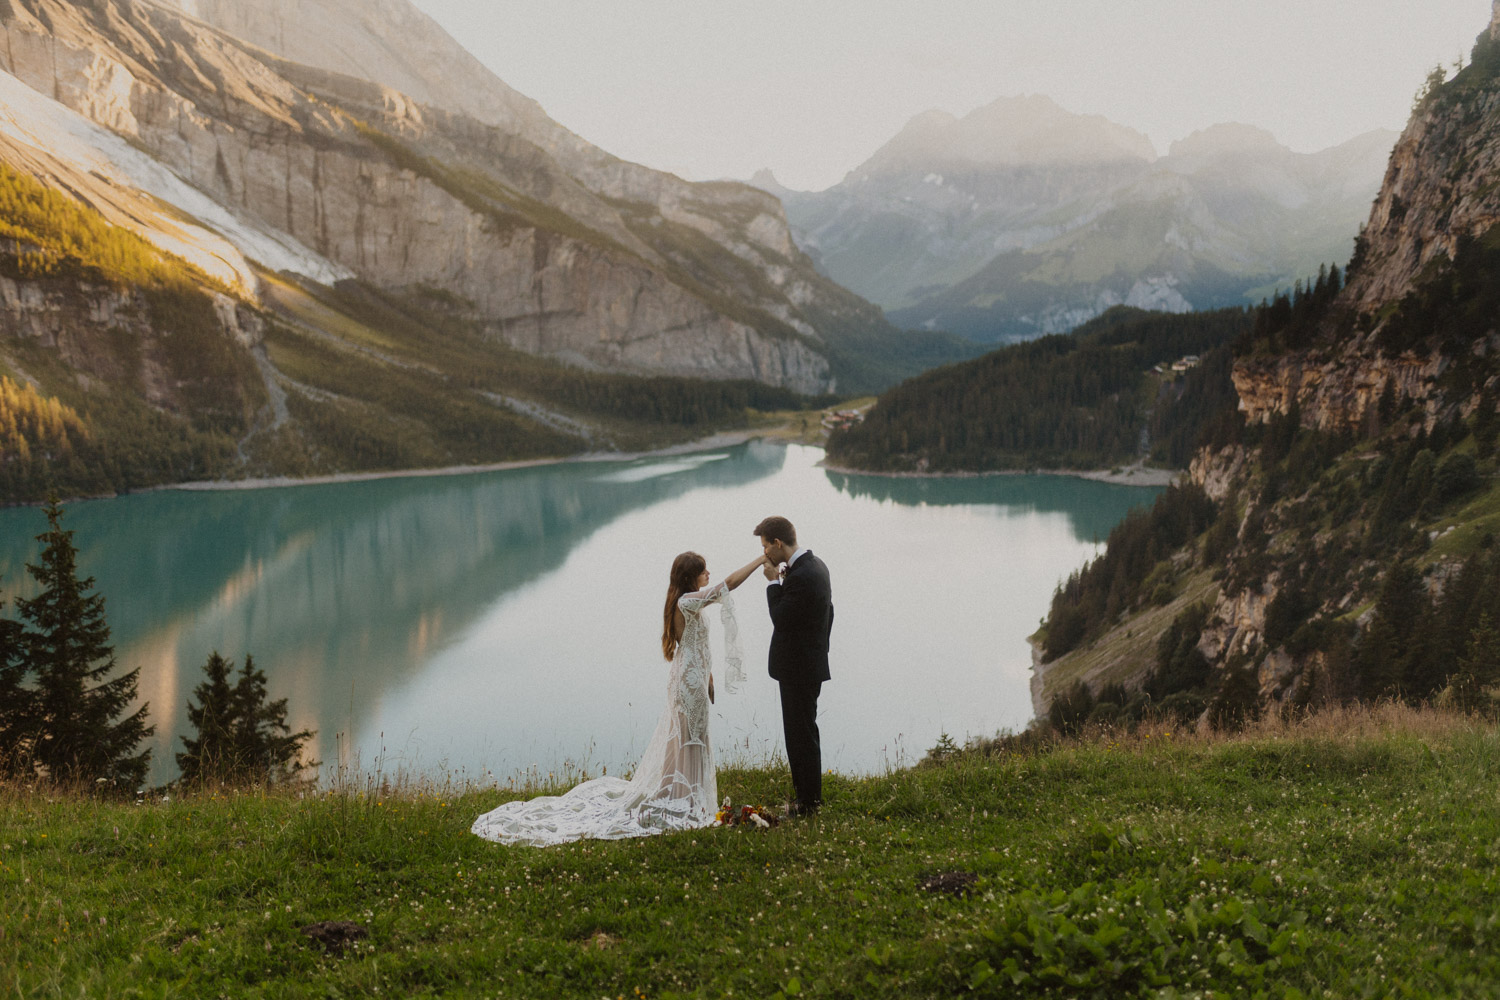 Bride and Groom reading Vows to each other at the Oeschinenlake in Switzerland at sunset.